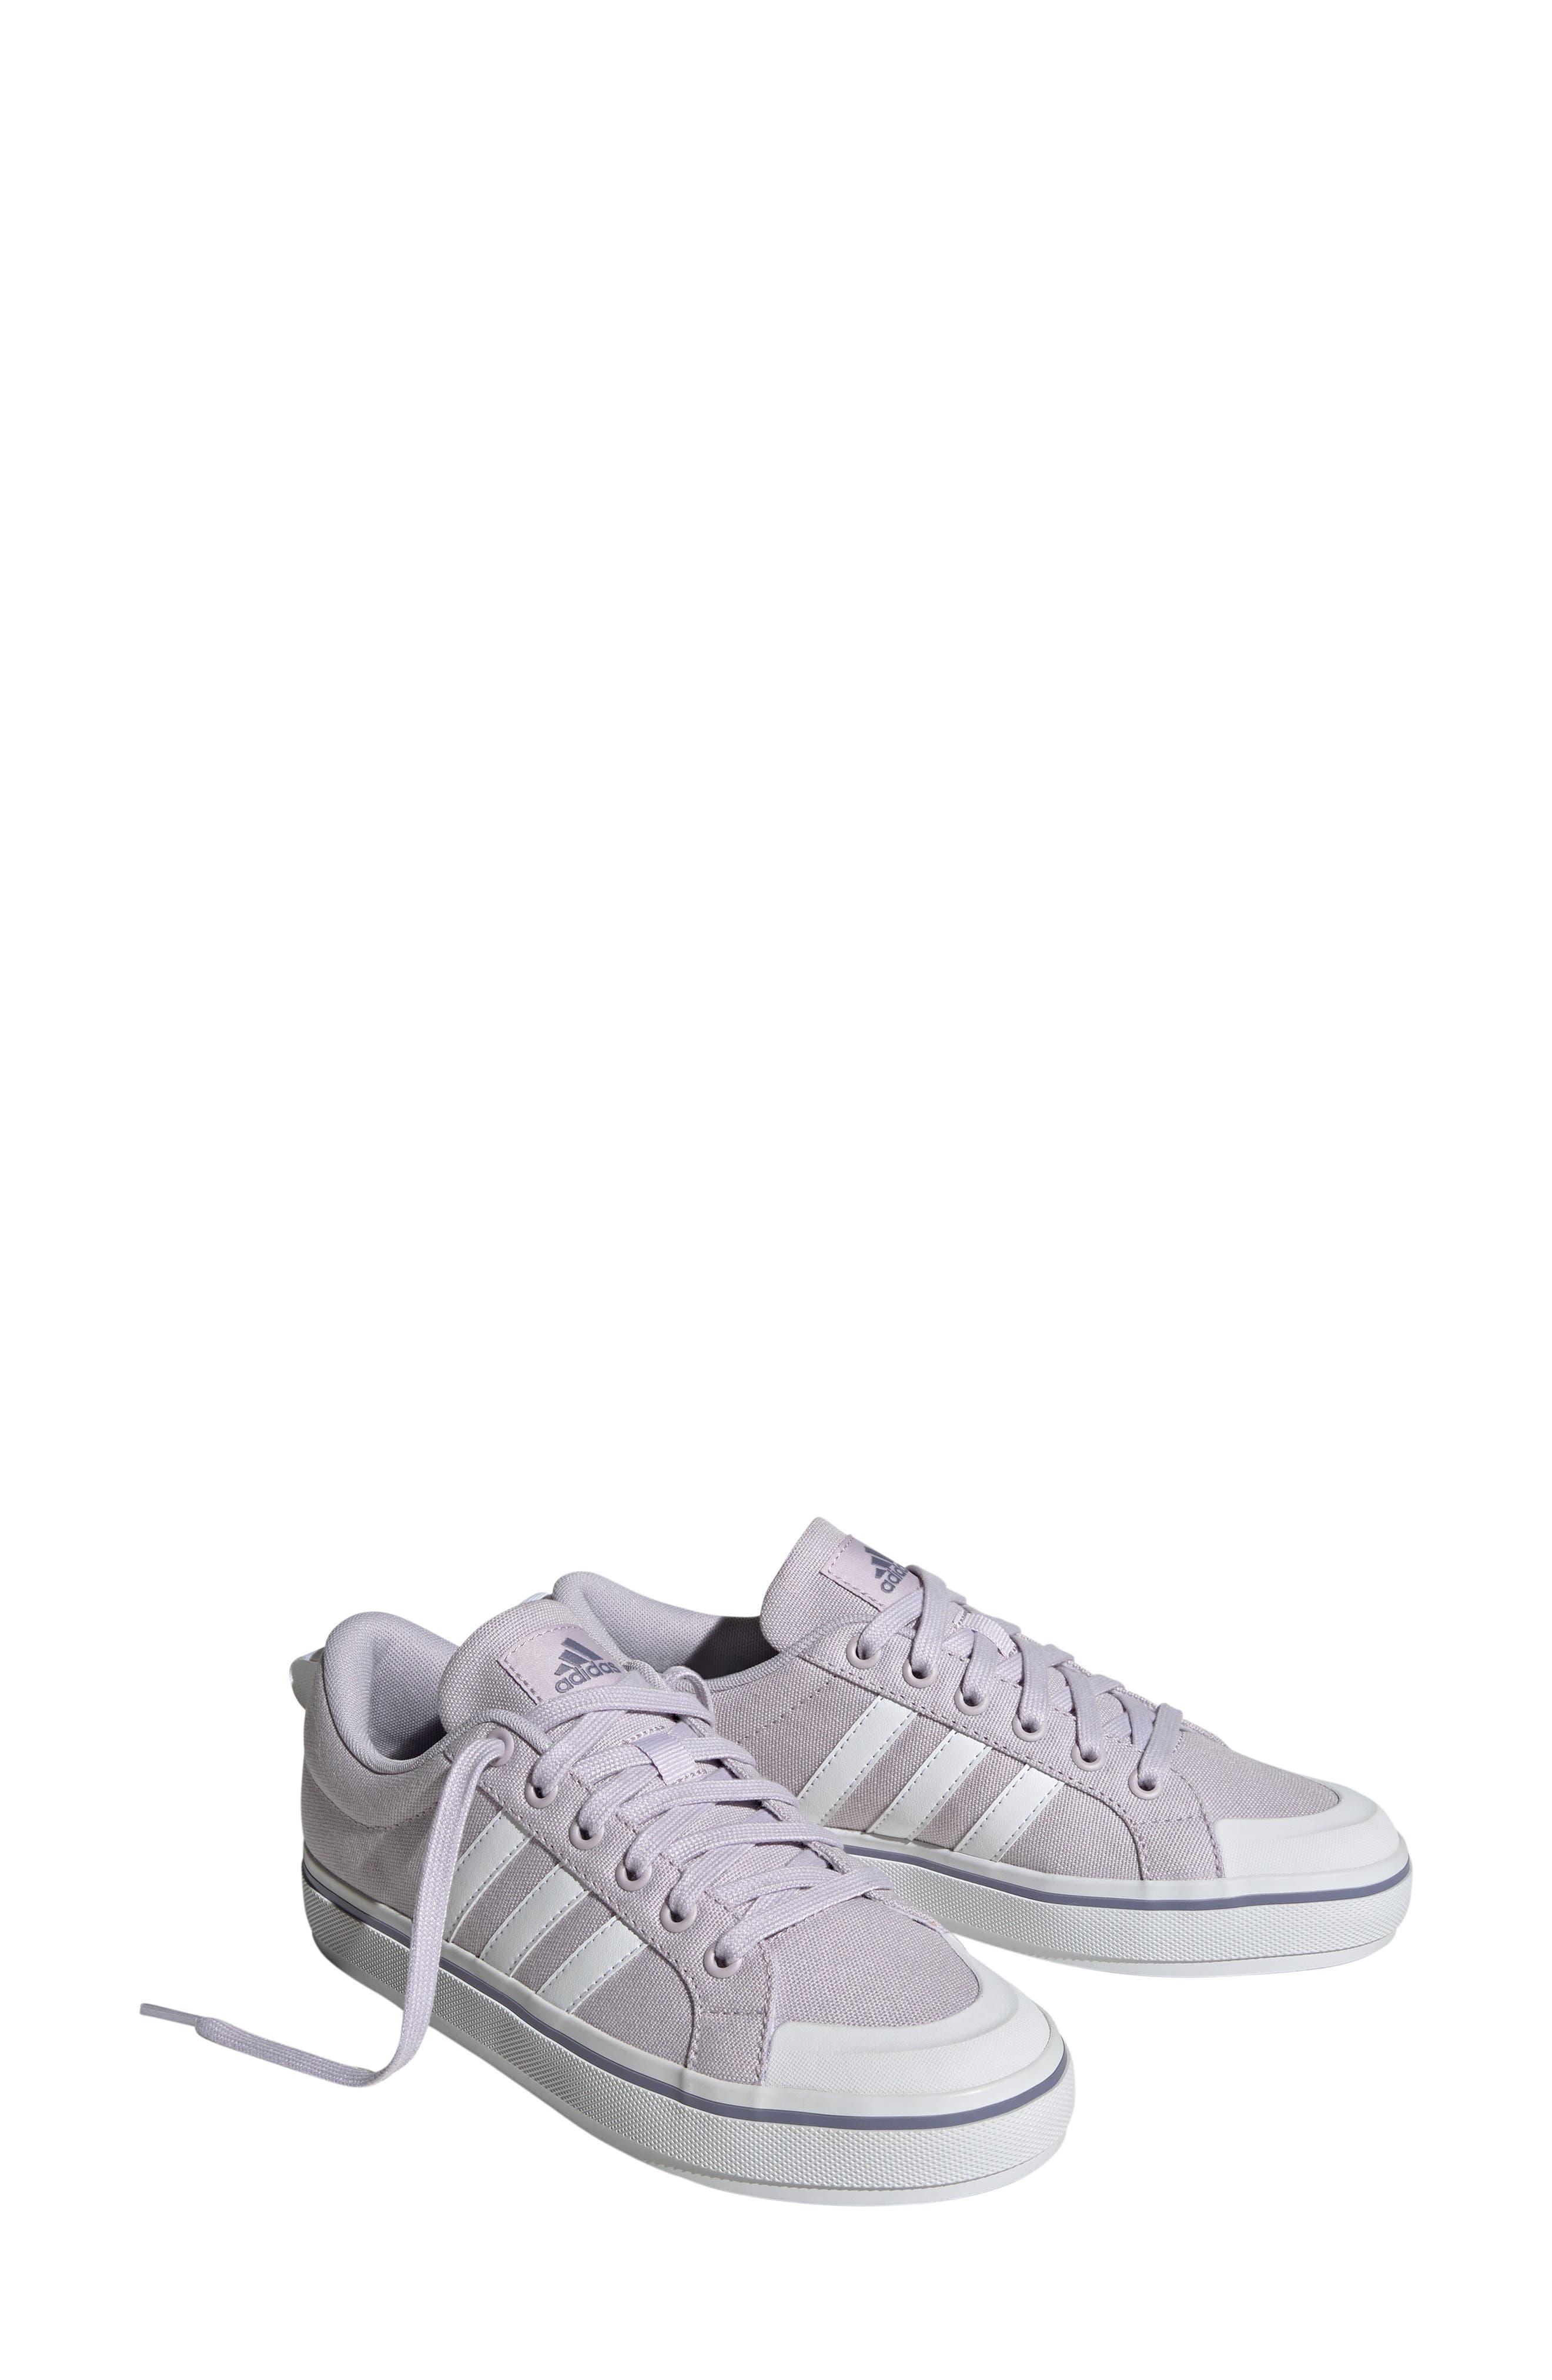 adidas Bravada 2.0 Low Top Sneaker In Silver/white/violet At